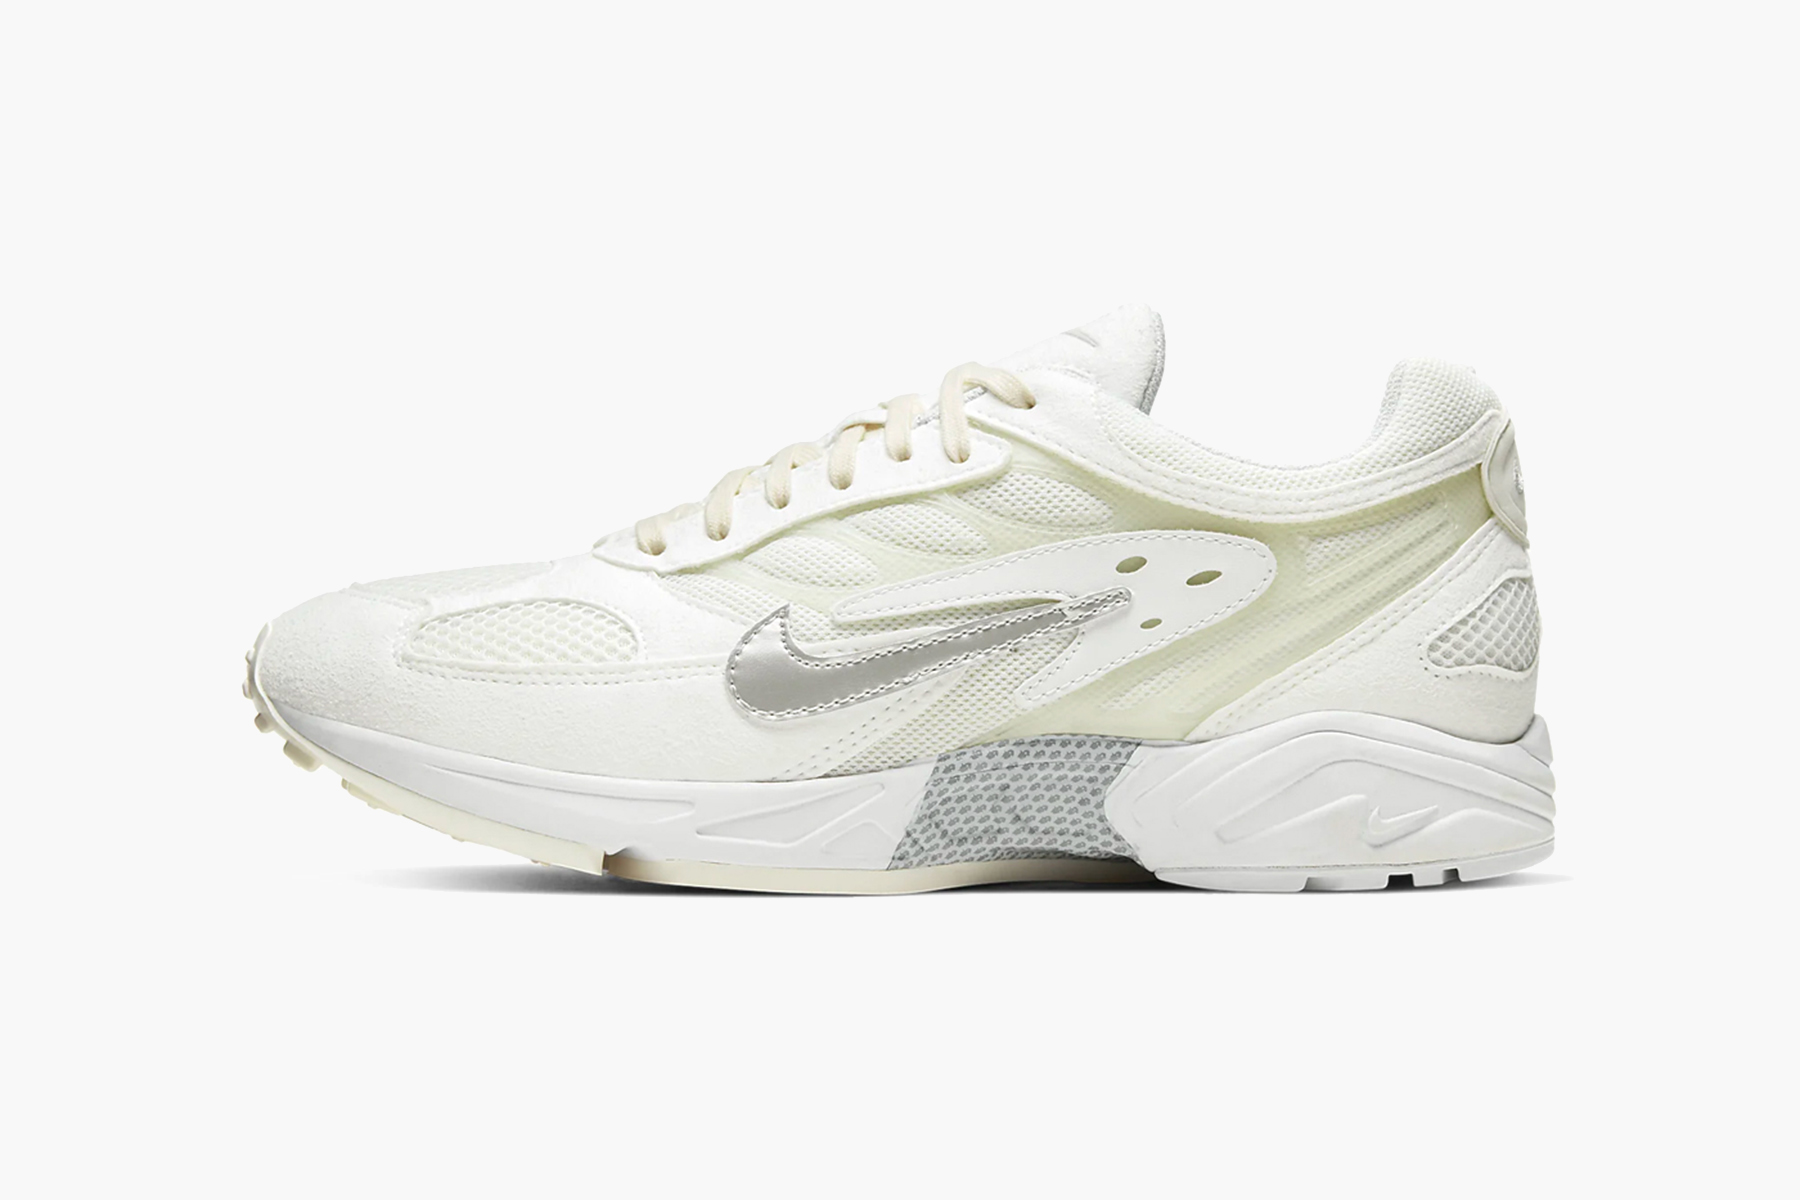 Nike Air Ghost Racer "White/Pure Release Hypebeast